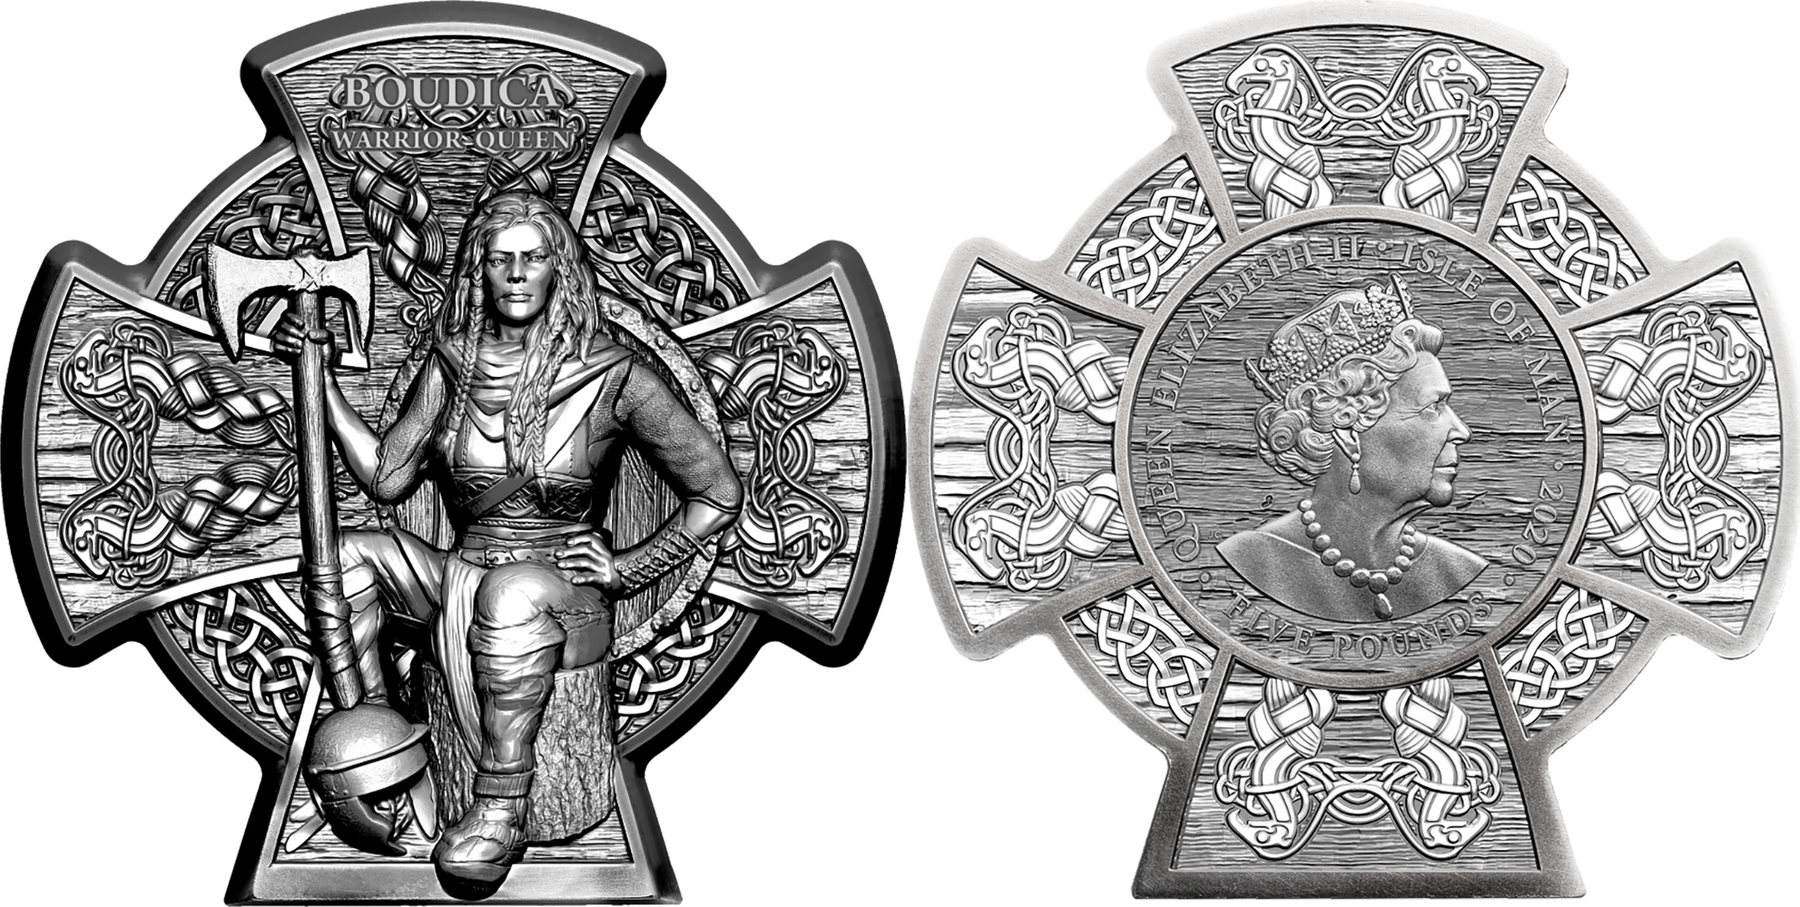 5 Pounds BOUDICA WARRIOR QUEEN 3 Oz Silver Coin 5 £ Isle of Man 2020 Antiqu...